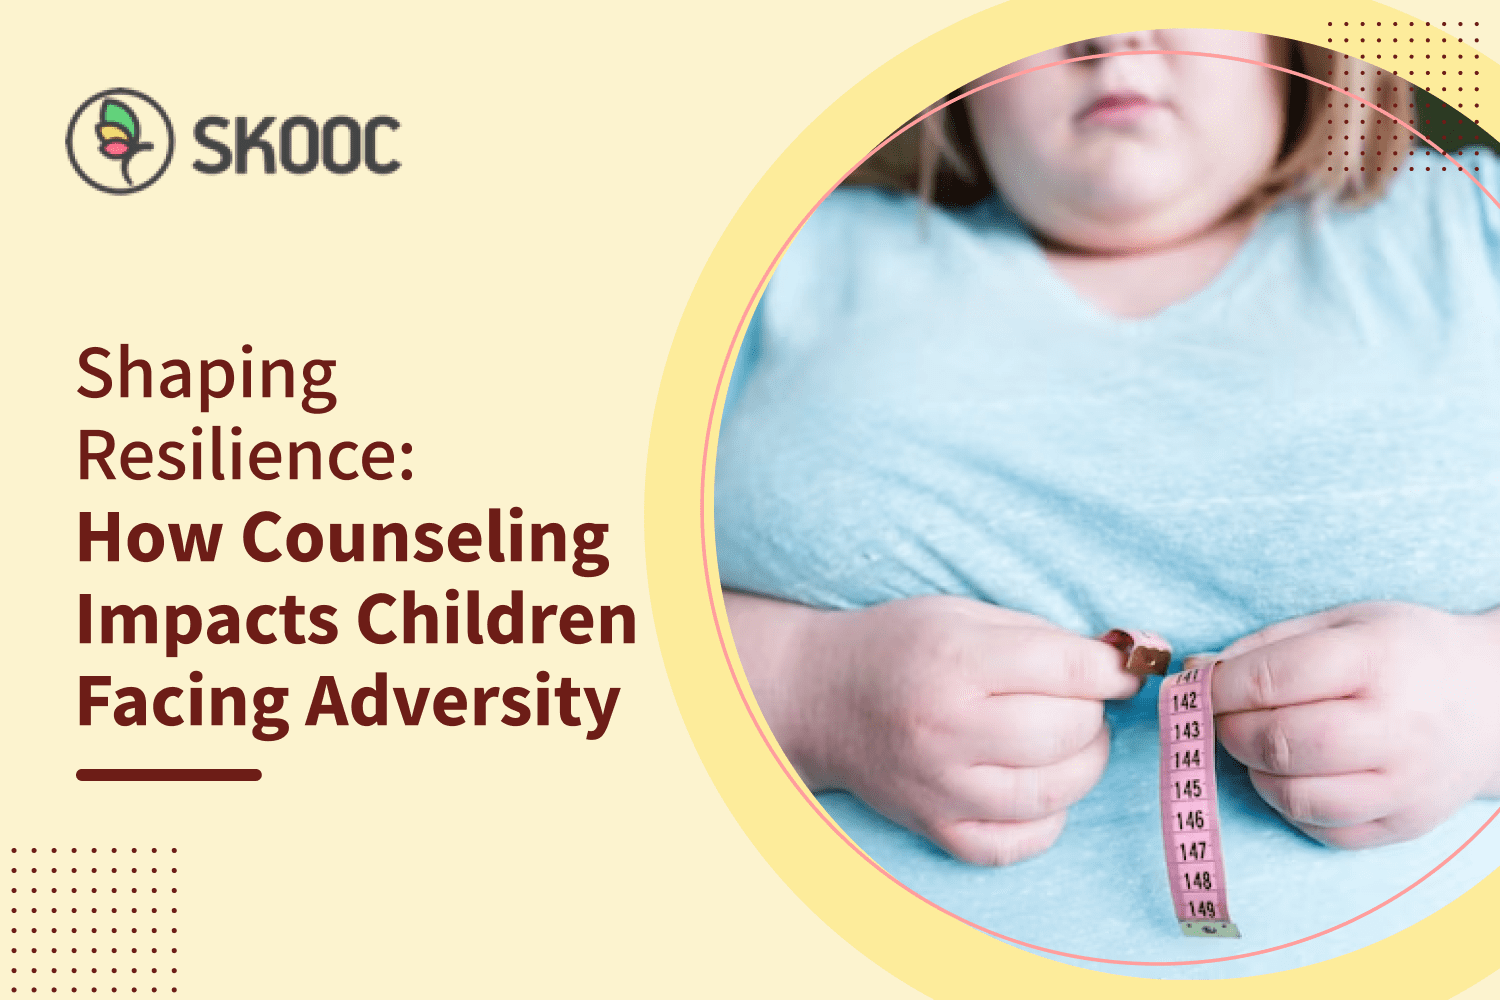 Shaping Resilience: How Counseling Impacts Children Facing Adversity